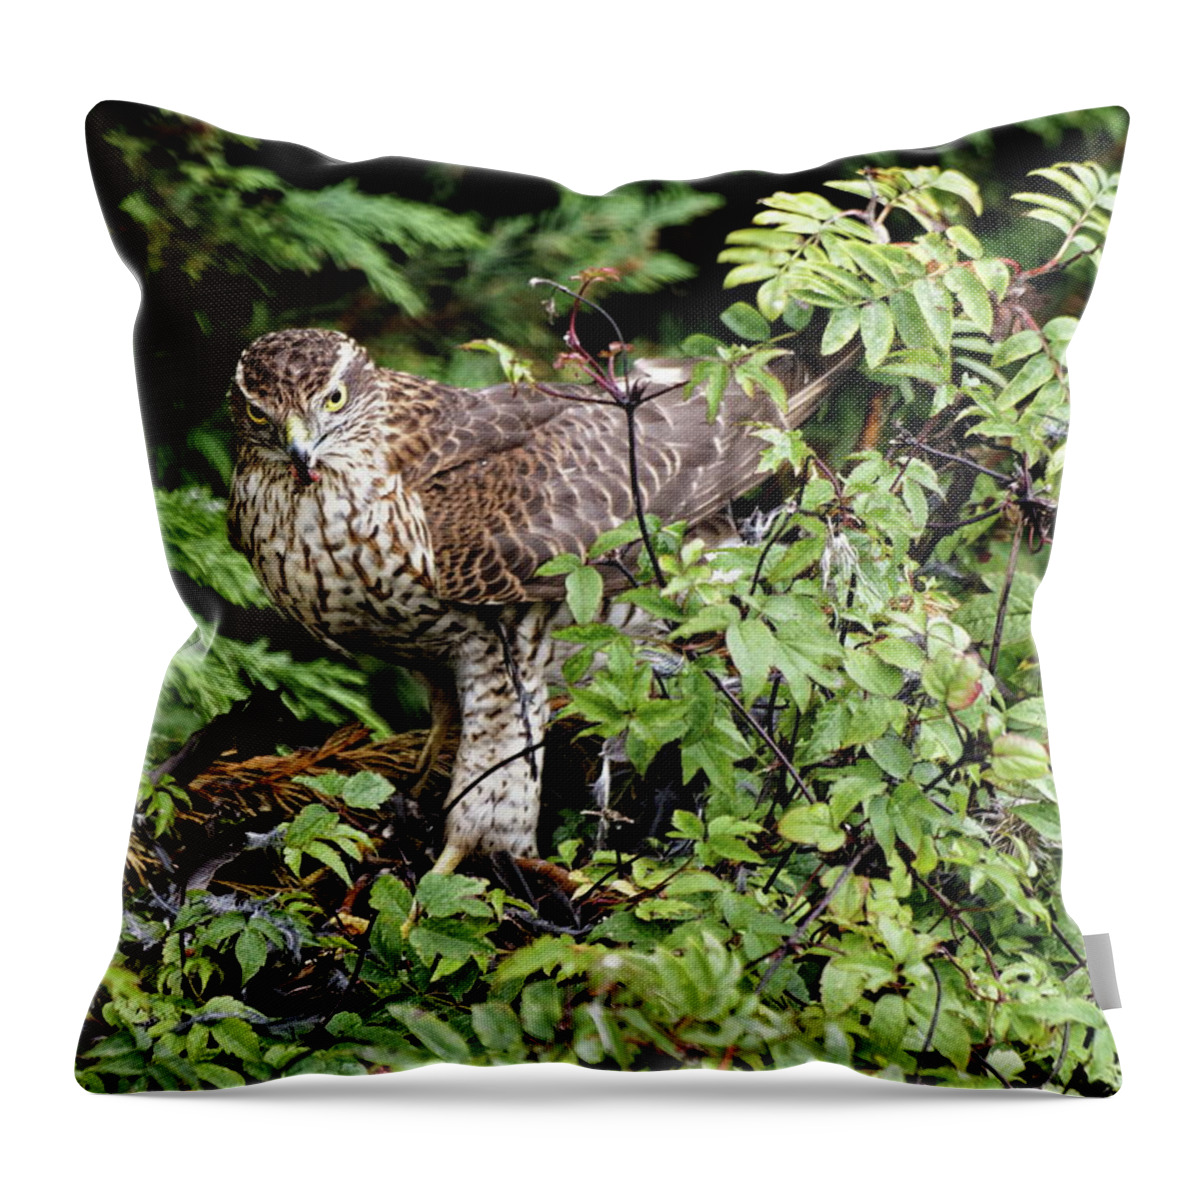 Sparrowhawk Throw Pillow featuring the photograph Sparrowhawk With Kill by Jeff Townsend